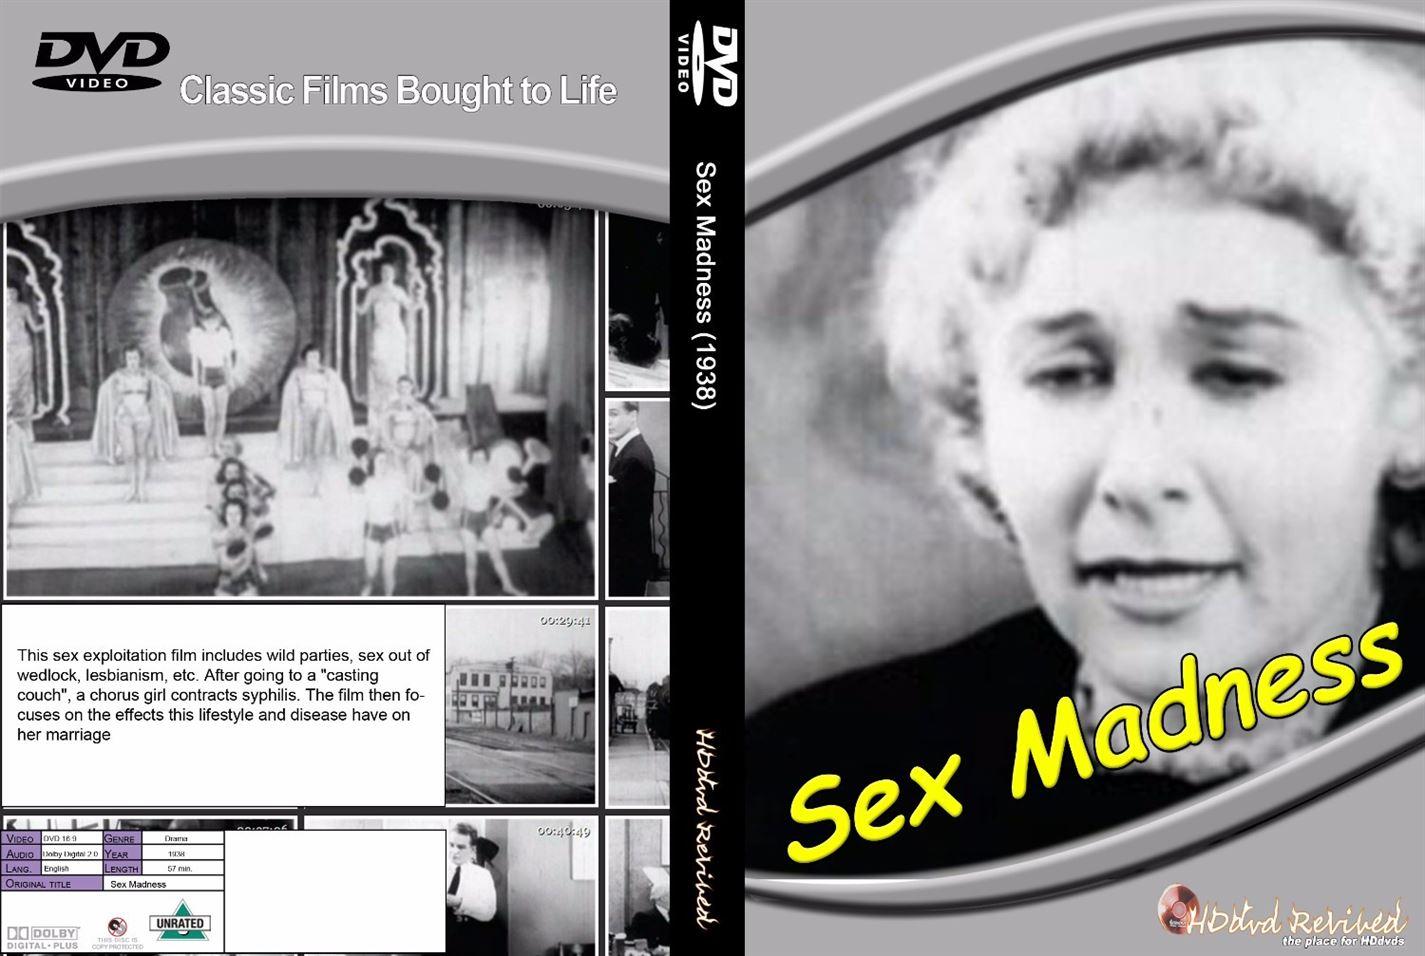 Sex Madness (1938) - DVD - (HDDVD- Revived) - NEW